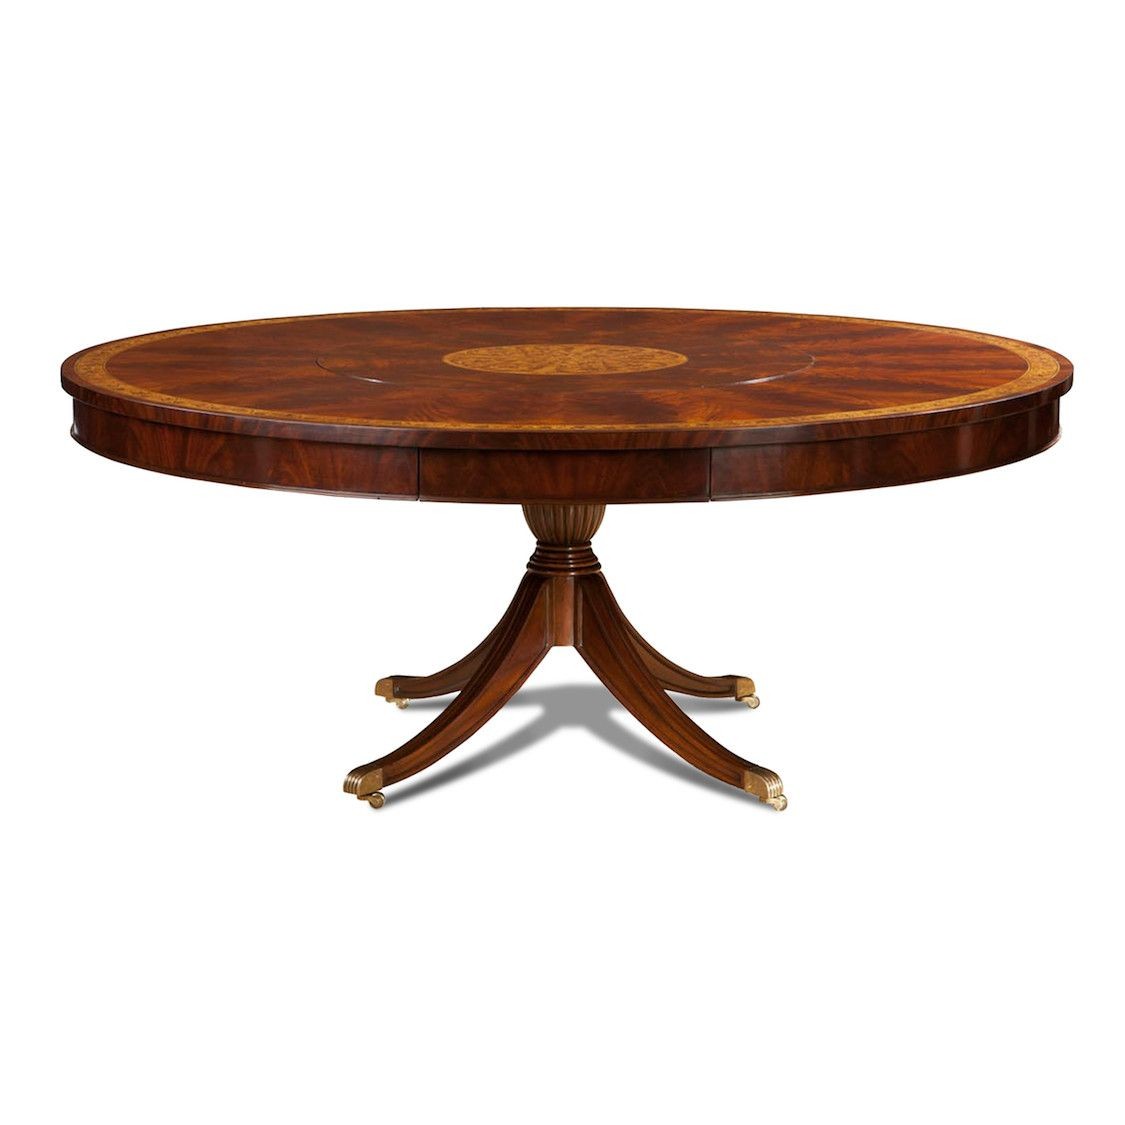 Round dining room table with built in lazy susan o